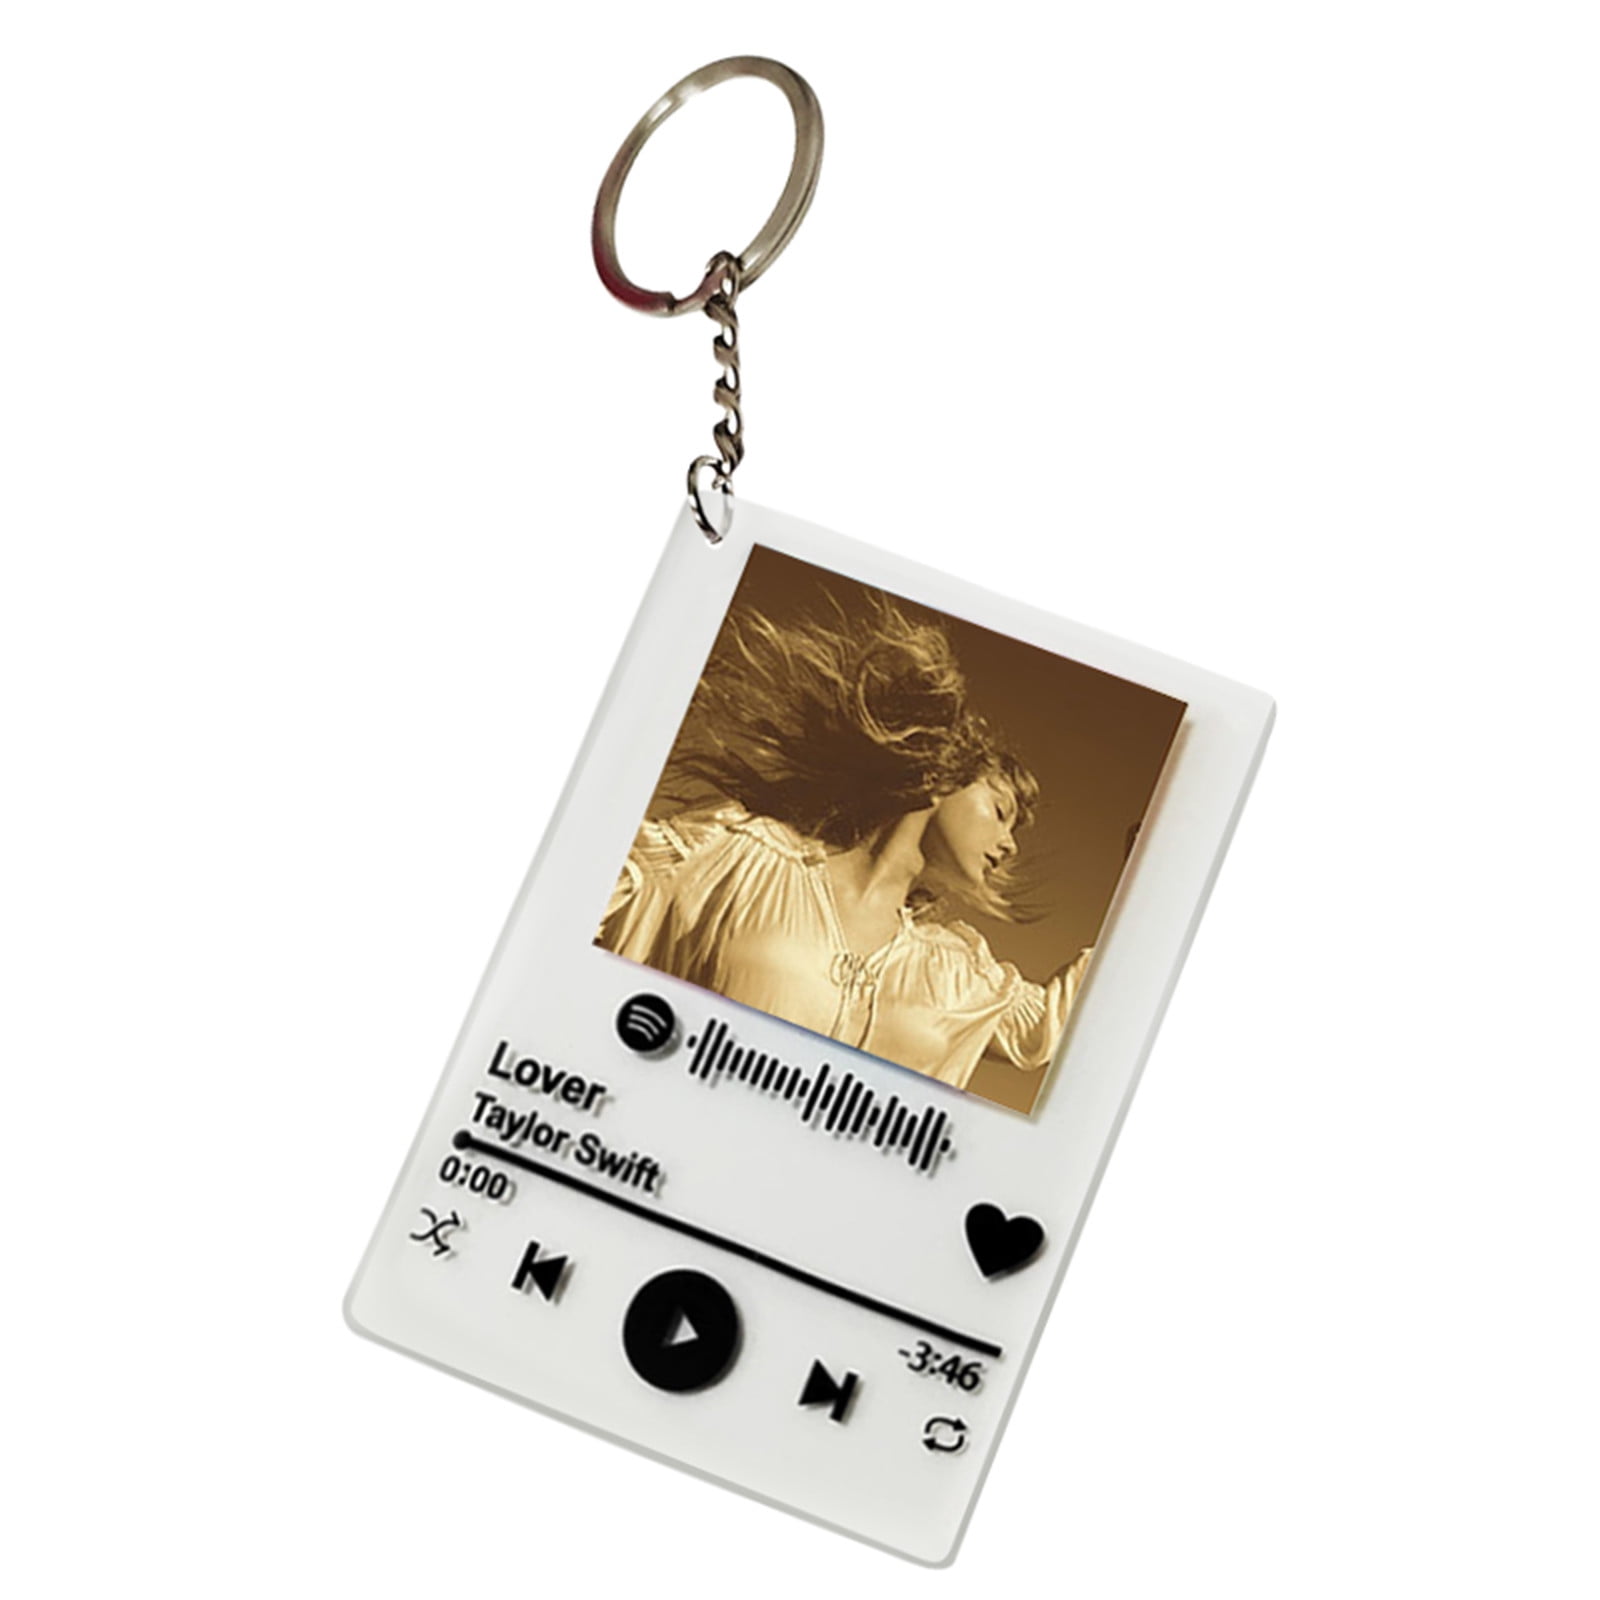 KeyChain  Taylor swift merchandise, Taylor swift pictures, Taylor swift